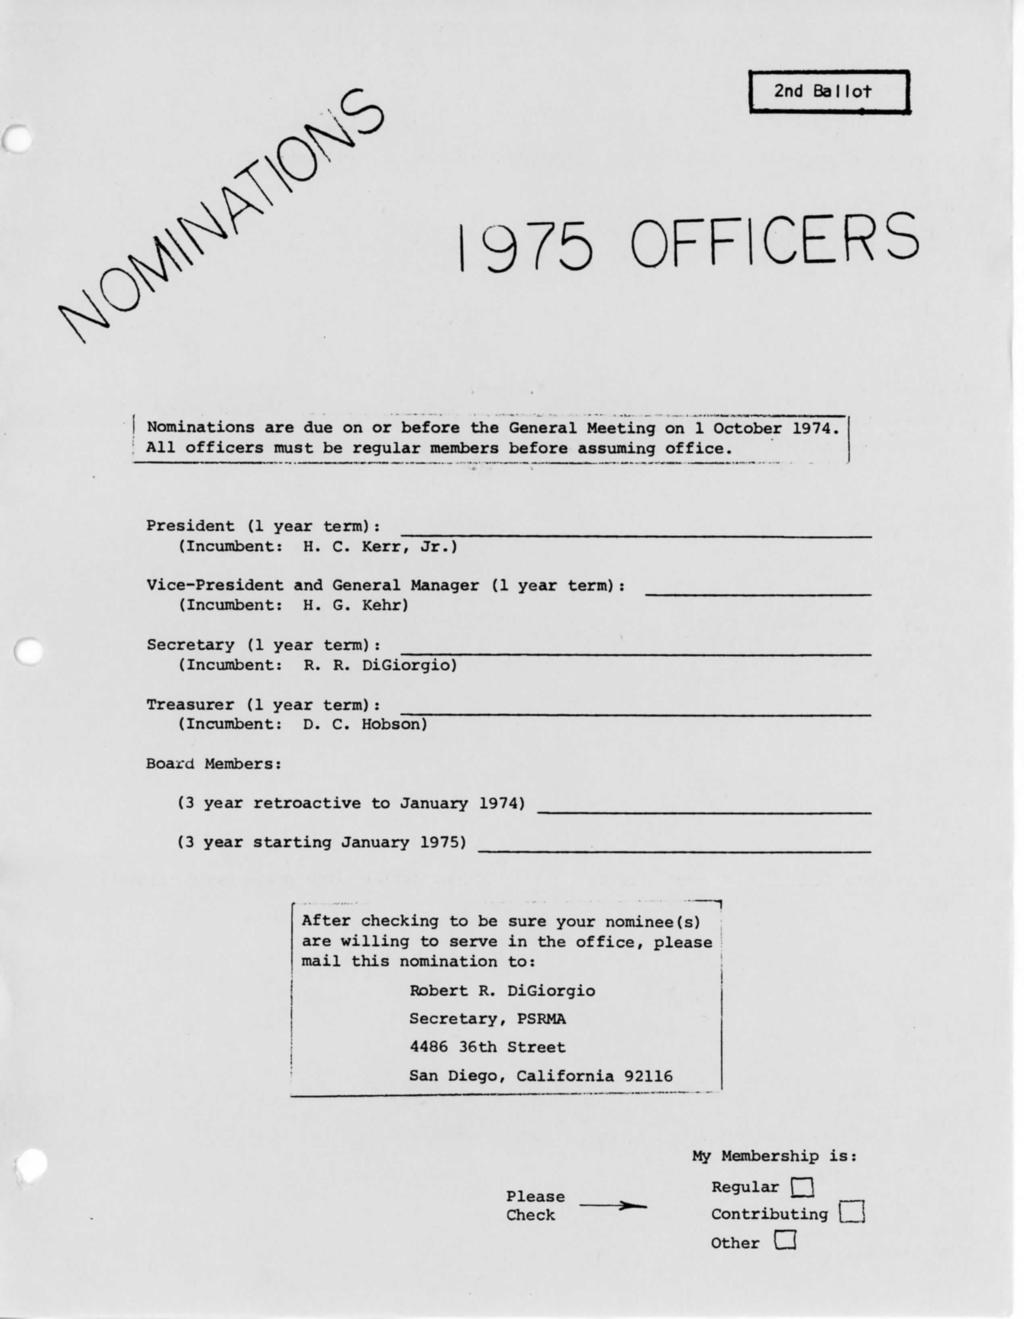 2nd Ballot 975 OFFICERS Nominations are due on or before the General Meeting on 1 October 1974. All officers must be regular members before assuming office. President (1 year term): (Incumbent: H. C.